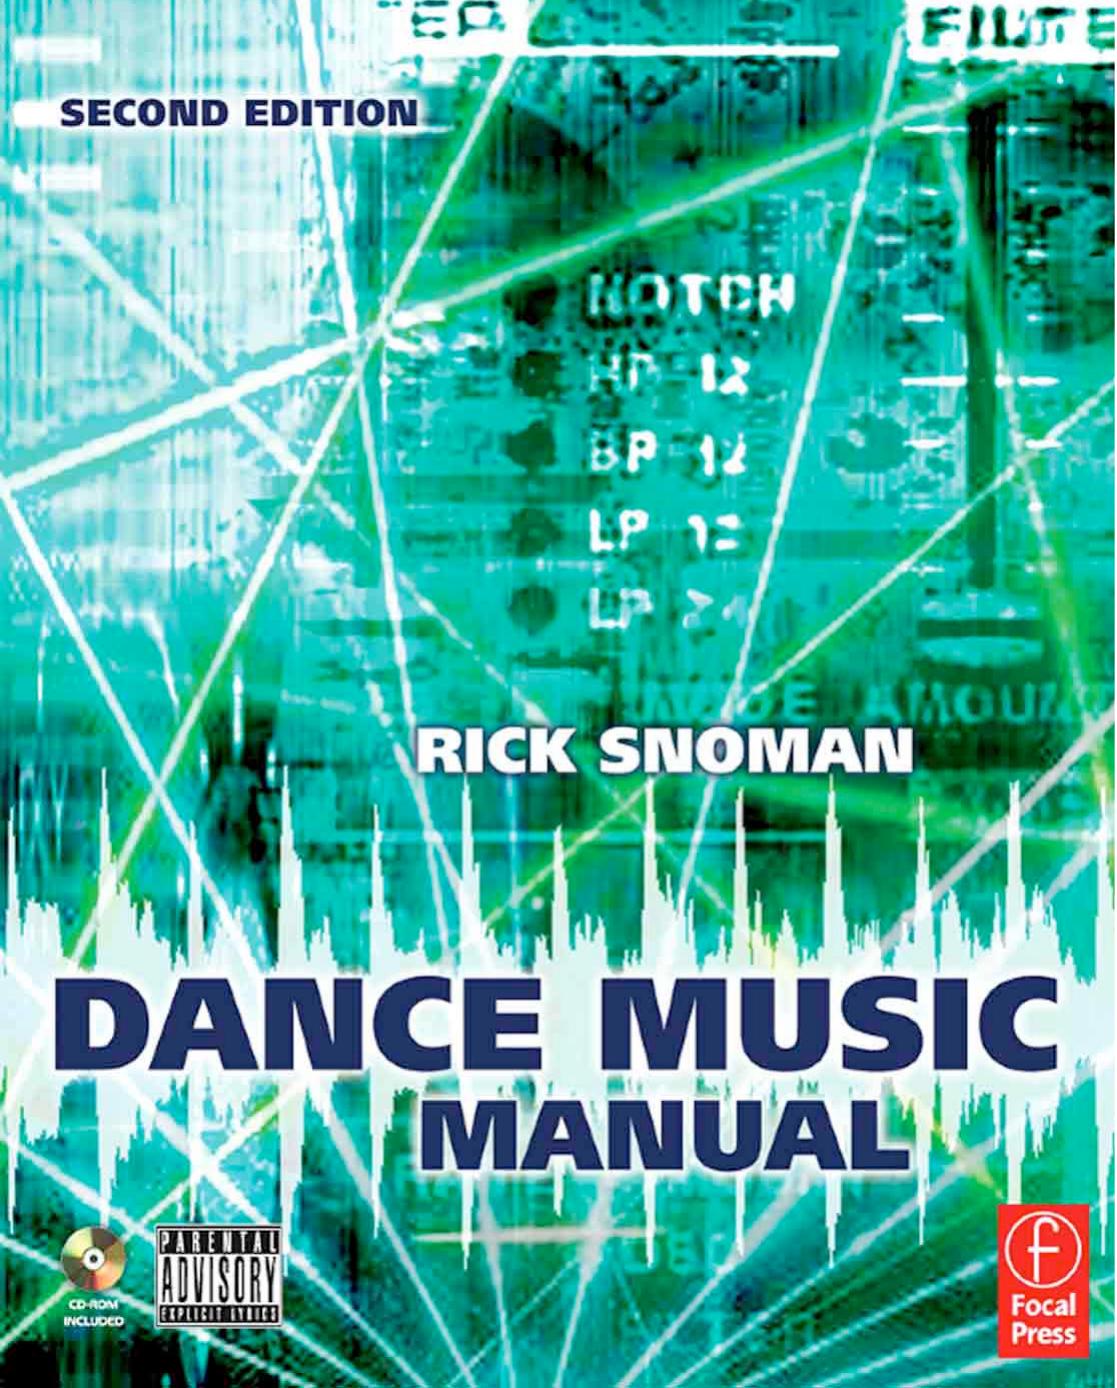 Dance Music Manual: Tools, Toys, and Techniques by Rick Snoman